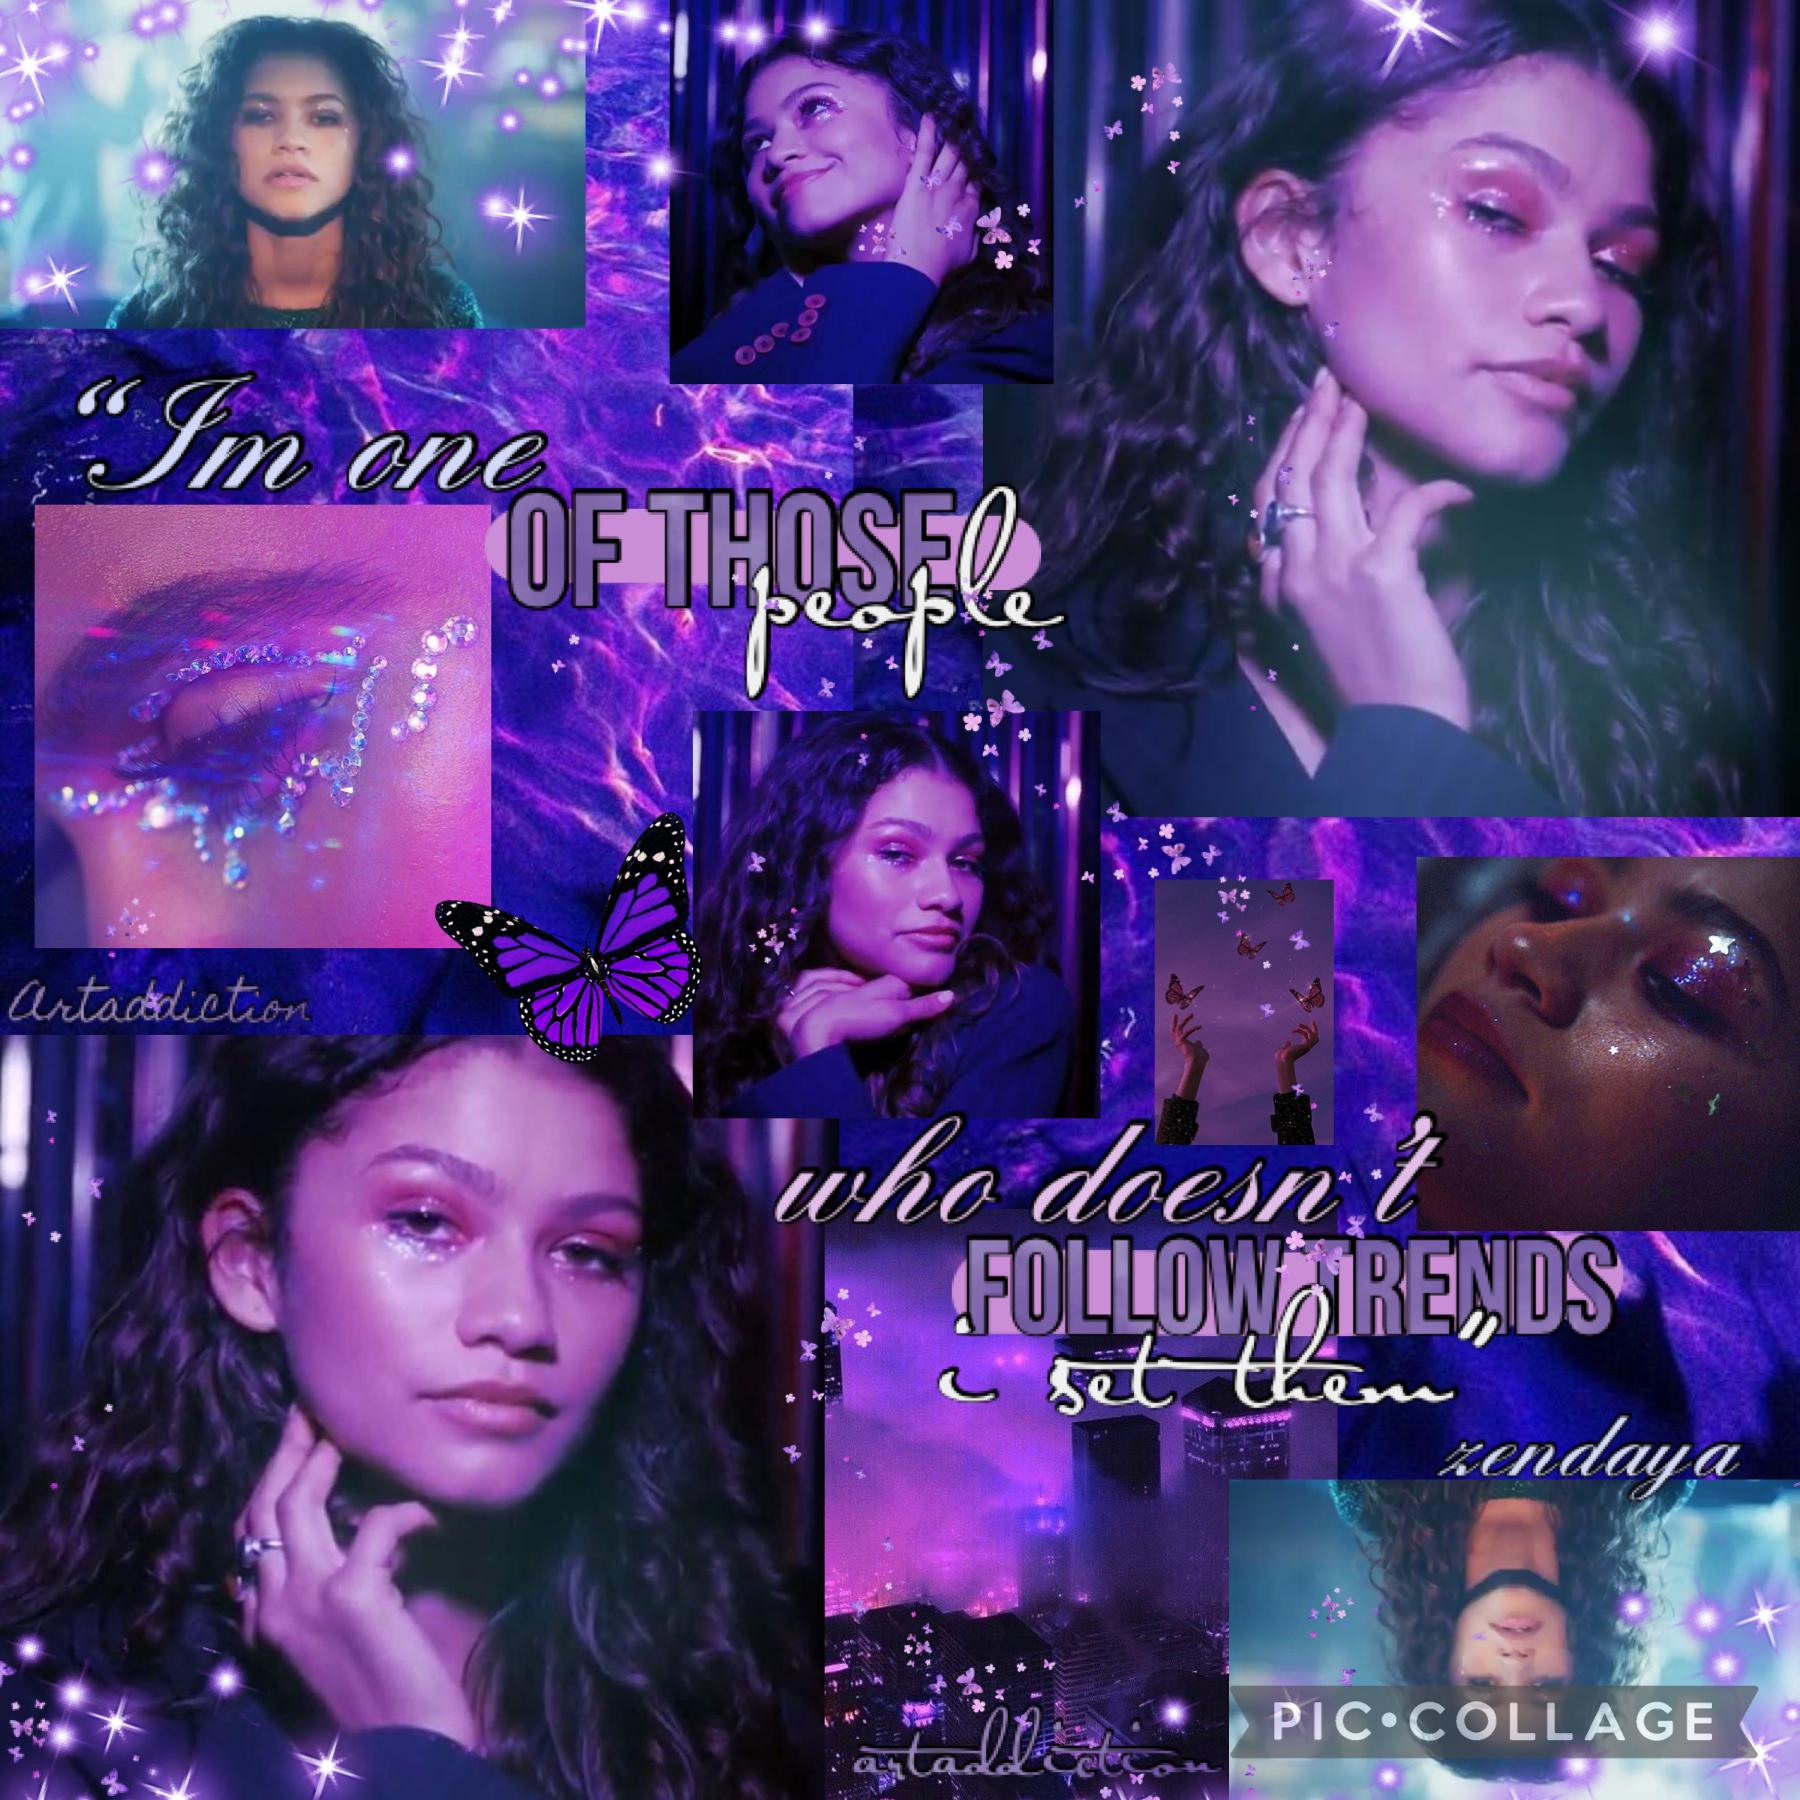 Hey guysss sorry this collage is a lil messy, i live purple so much ahh and zendaya lol , hows everyone I tested positive for covid but im feeling much better x 💜✨